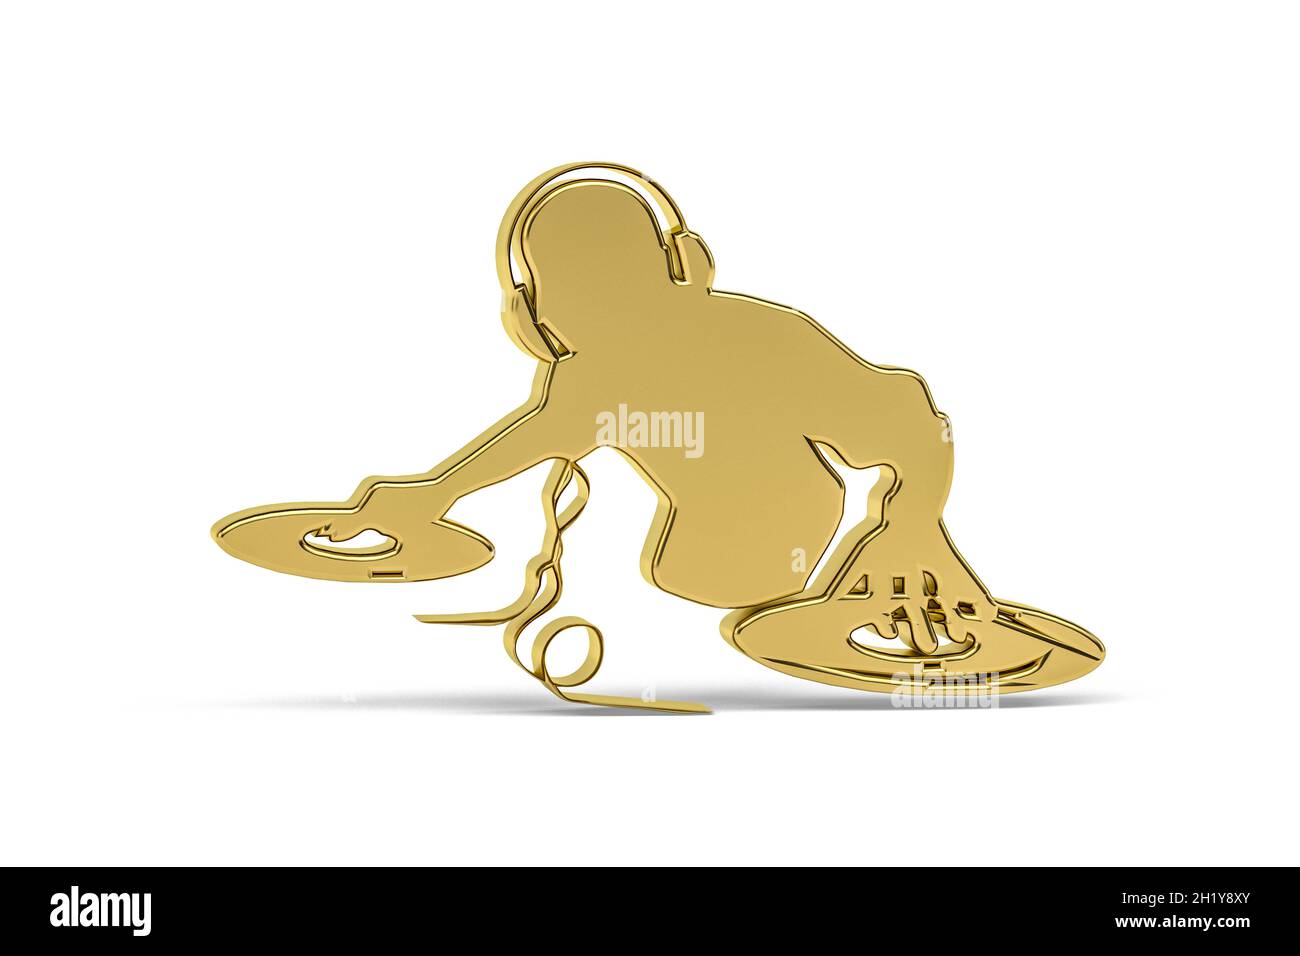 Golden 3d rap music icon isolated on white background - 3d render Stock Photo